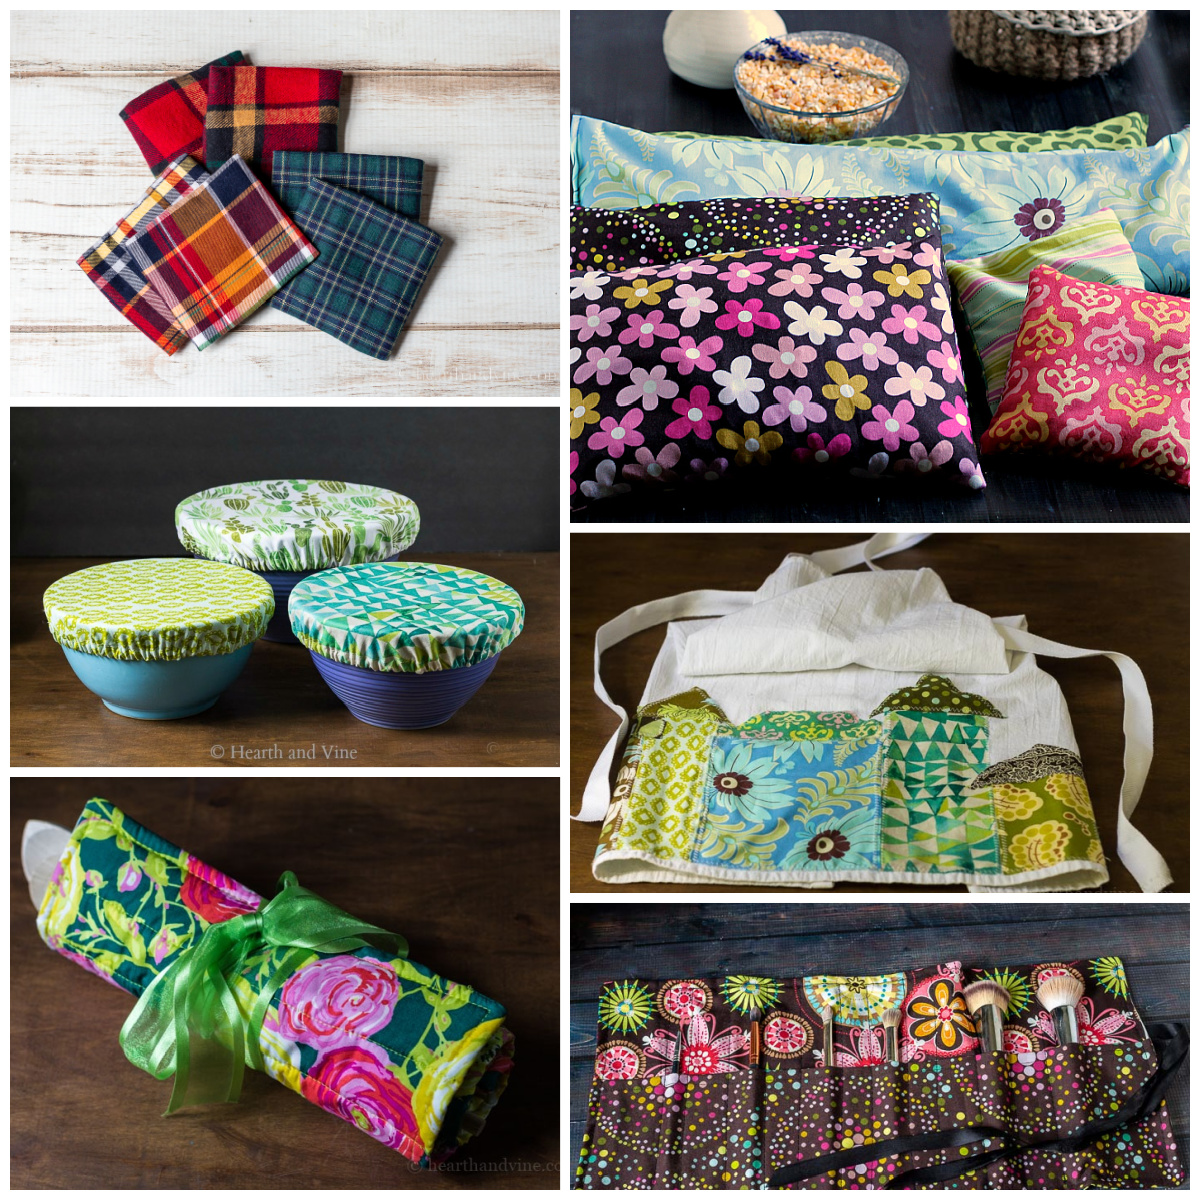 Collage of handmade sewn gifts including sore muscle bags, bowl covers, hand warmers, an apron and a trivet.